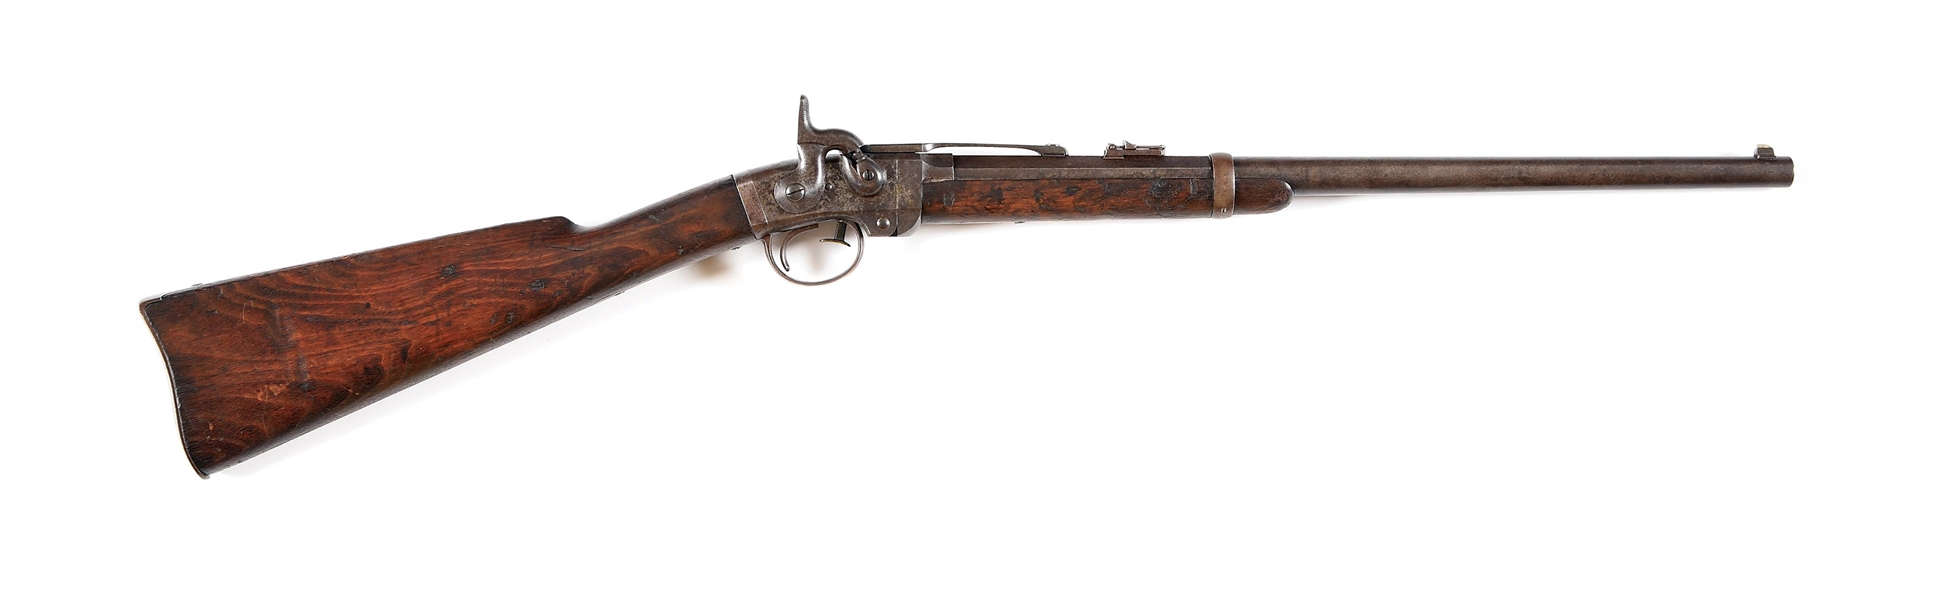 (A) SMITH SINGLE SHOT CARBINE IDENTIFIED TO WILLIAM MORT, 3RD MARYLAND CAVALRY.